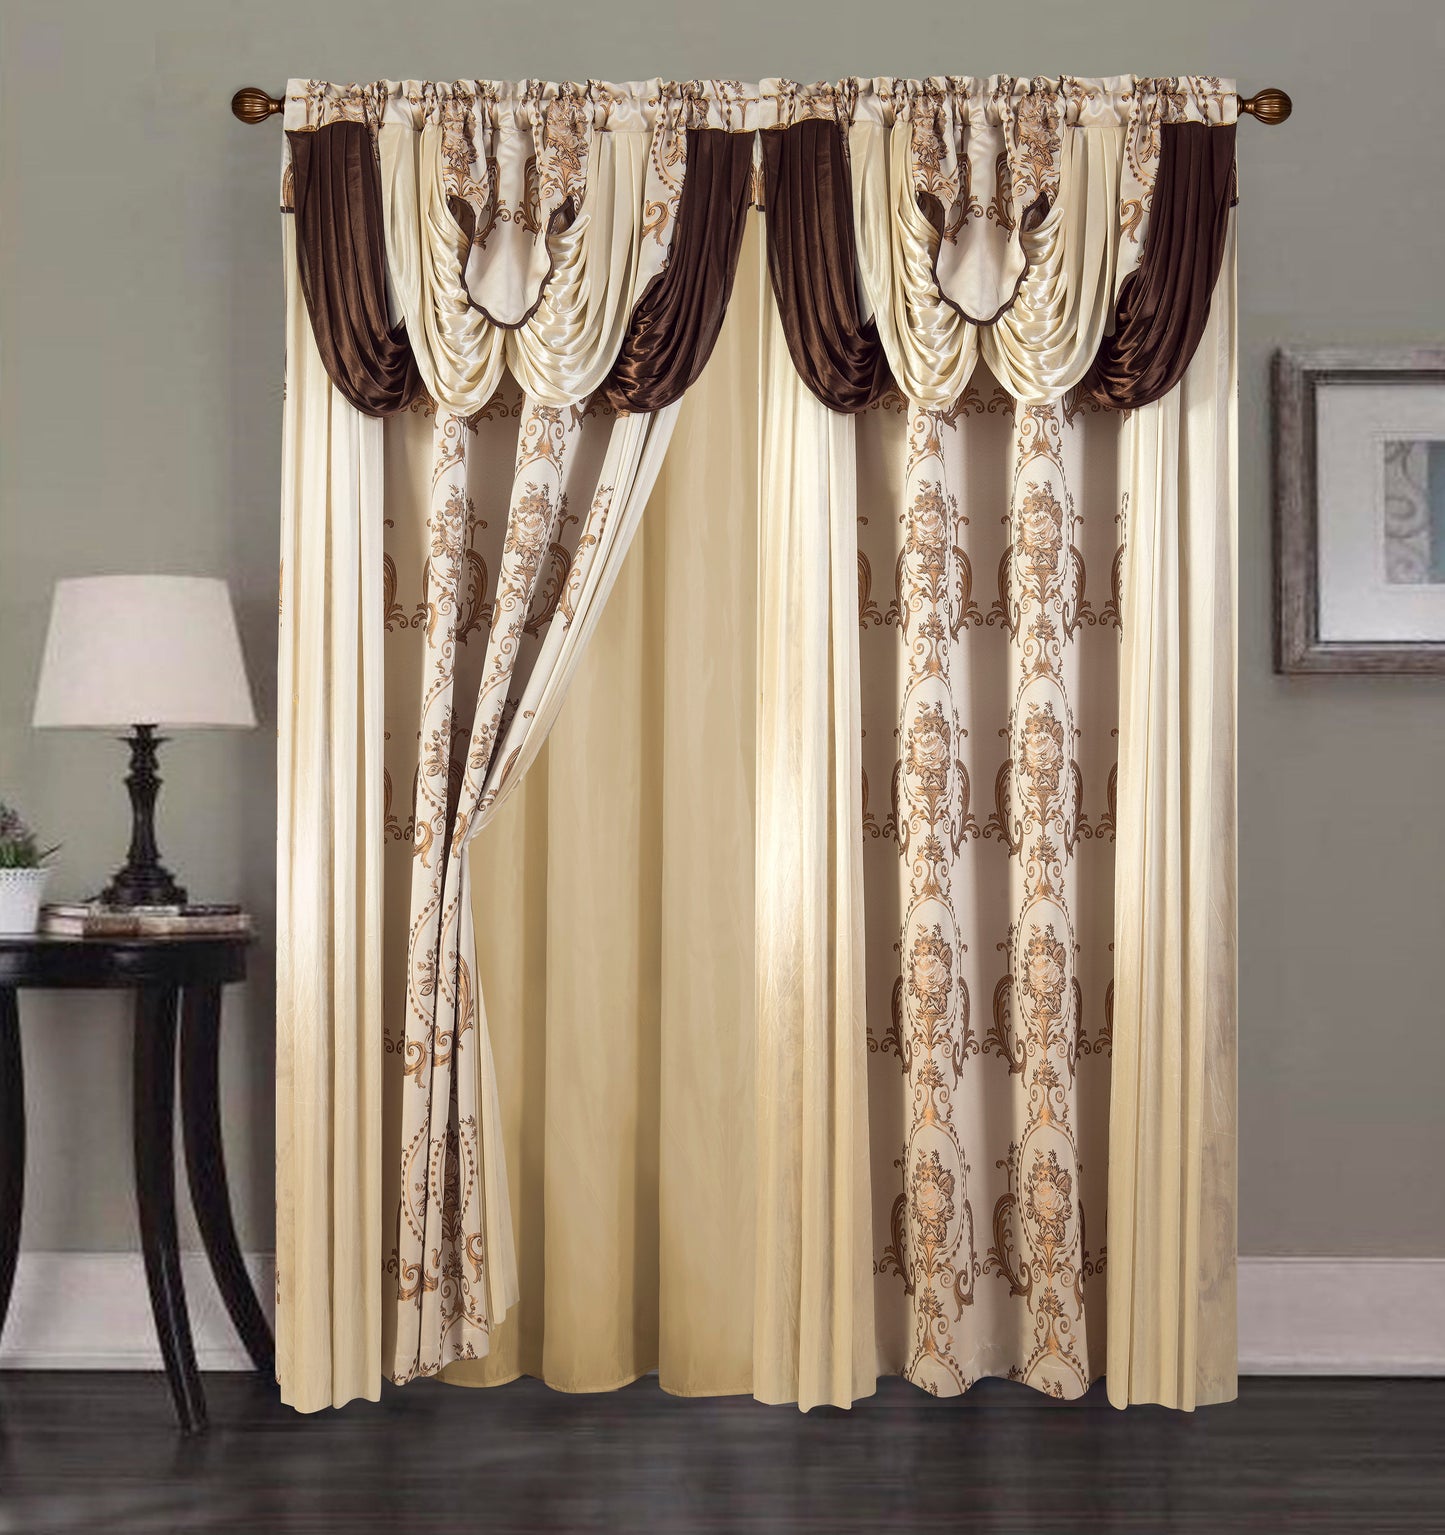 2PC CURTAIN SET W/ ATTACHED VALANCE & BACKING - Nevaeh